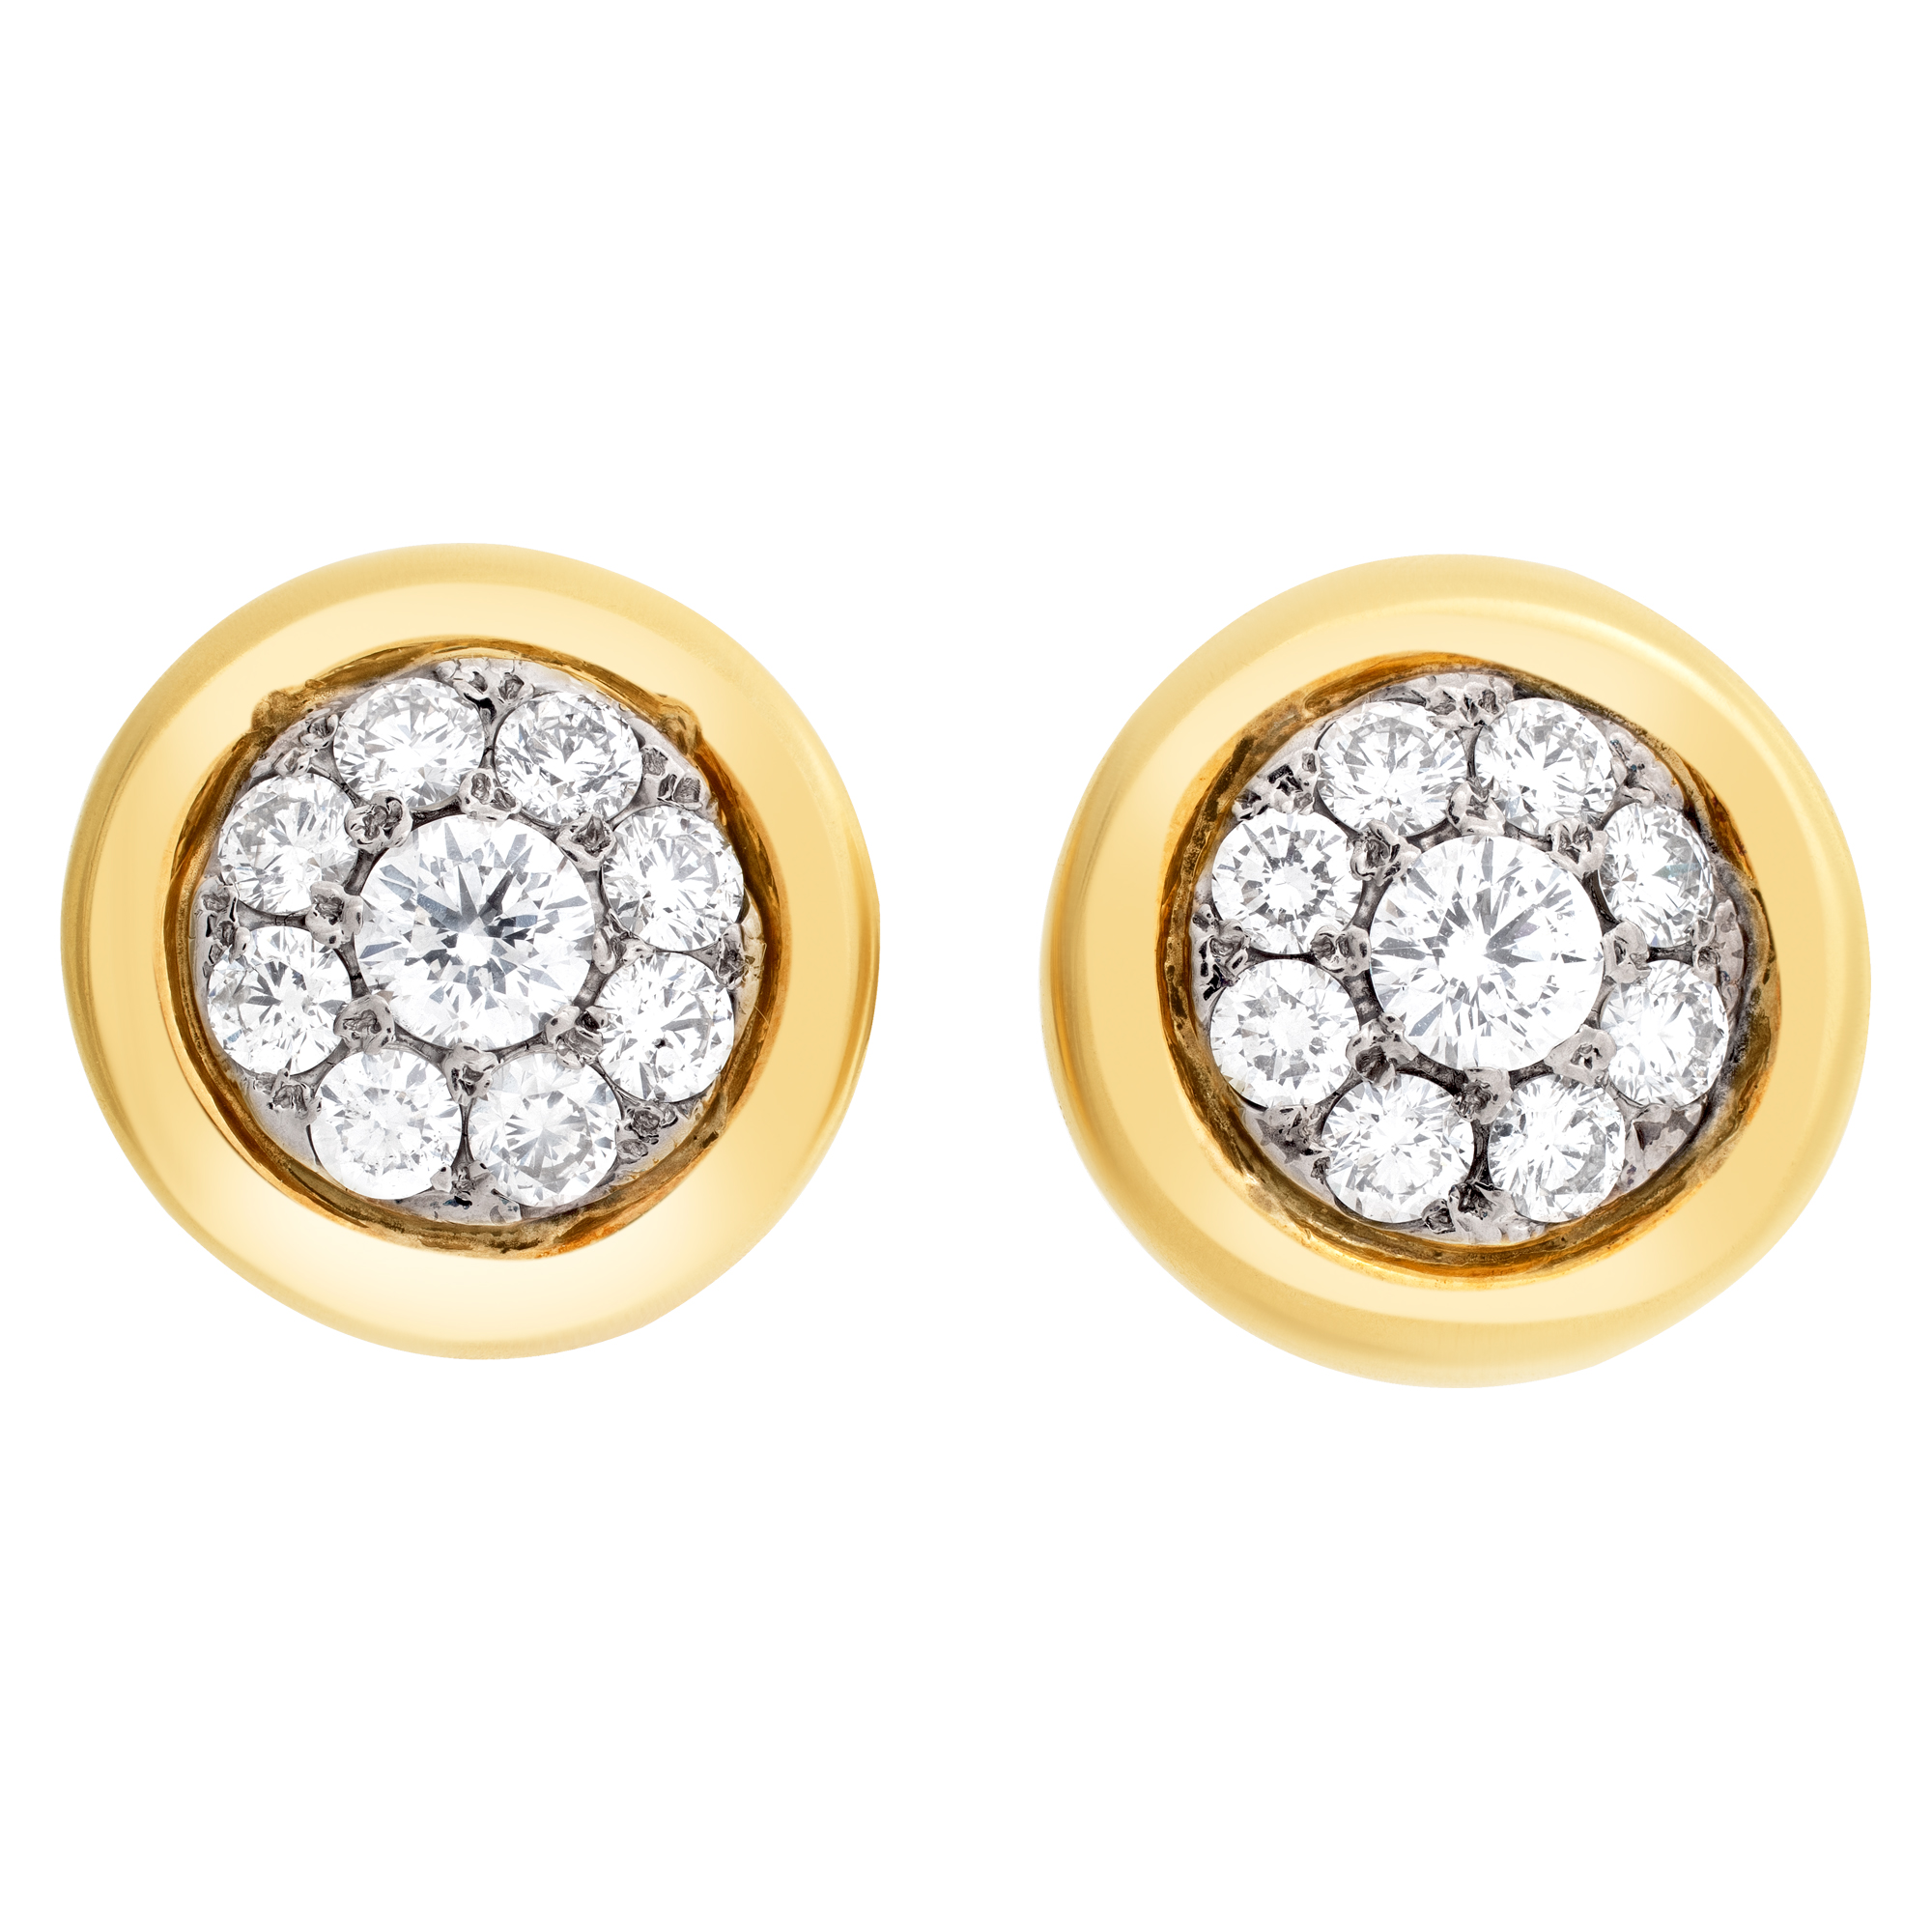 Classic button earring with over 4 carats full cut round brillant diamonds center, set in 18Kt yellow gold.